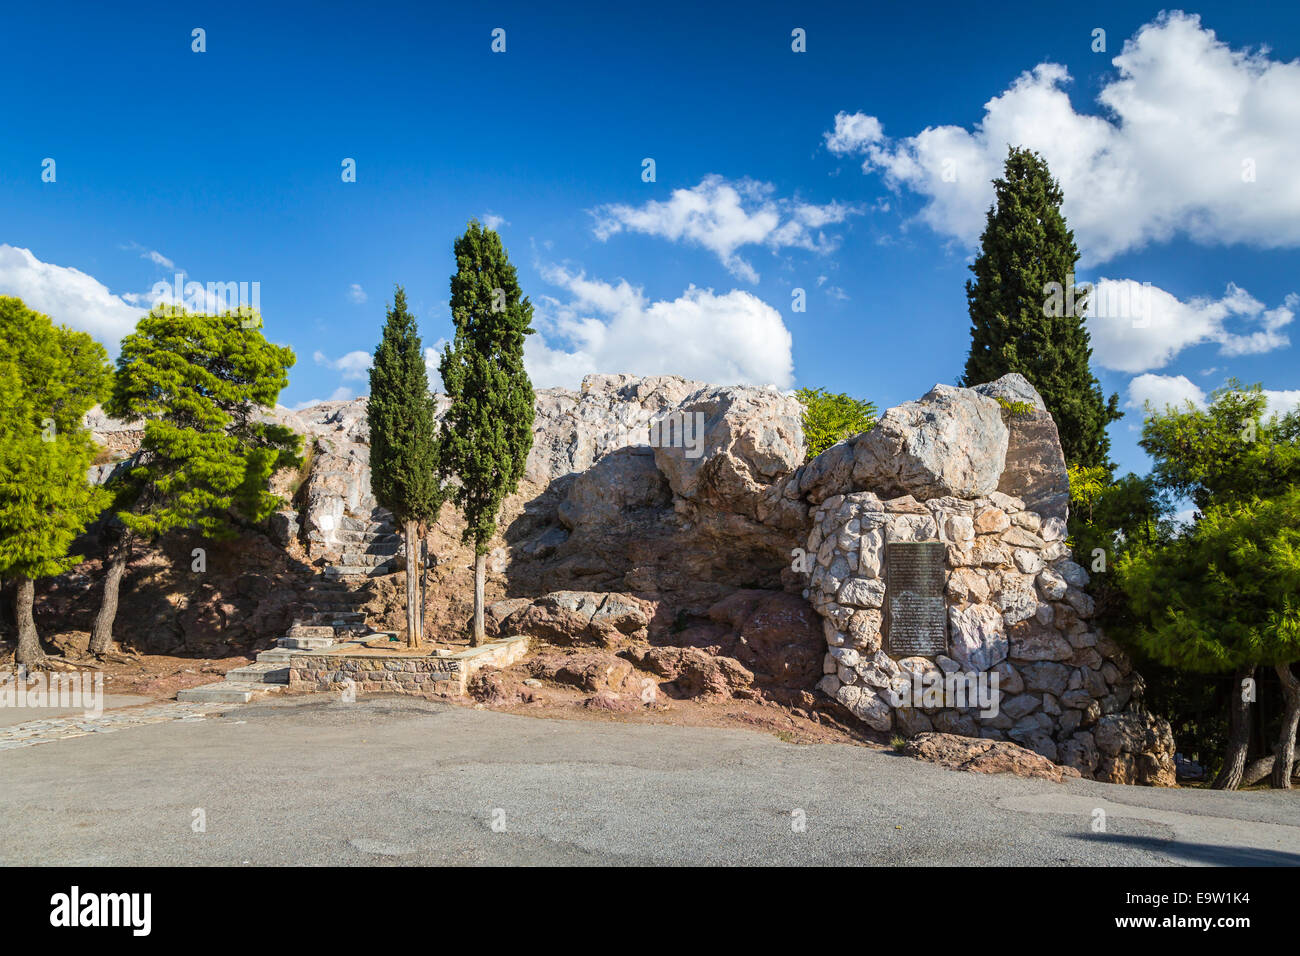 Mars Hill of Biblical importance near the Acropolis in Athens, Greece, Europe. Stock Photo